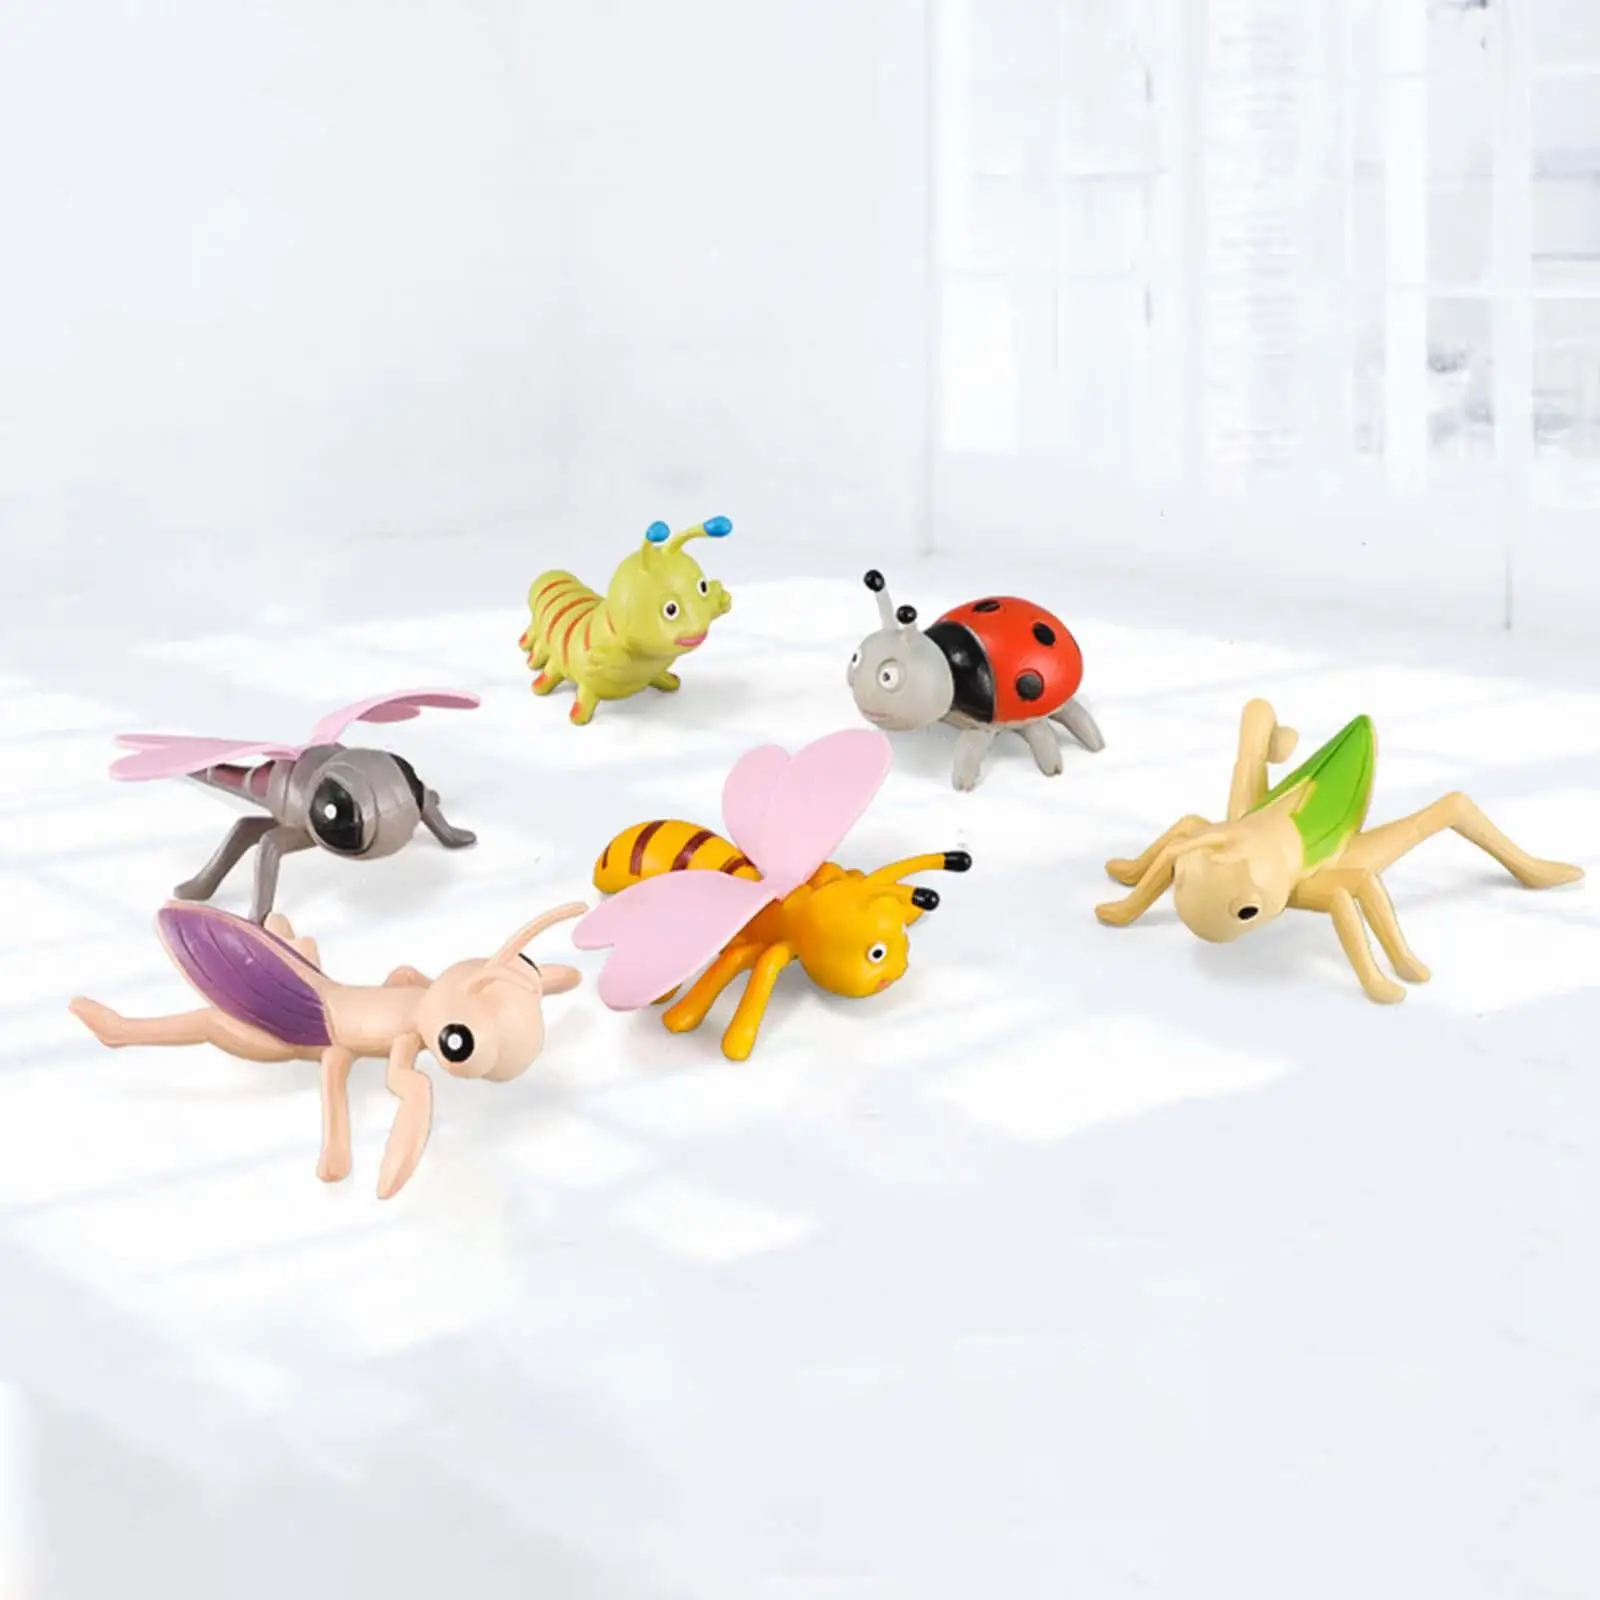 Set of 6 Count Artifical Animal Model Toy for Toddler Accessories Party Favors Educational Toys